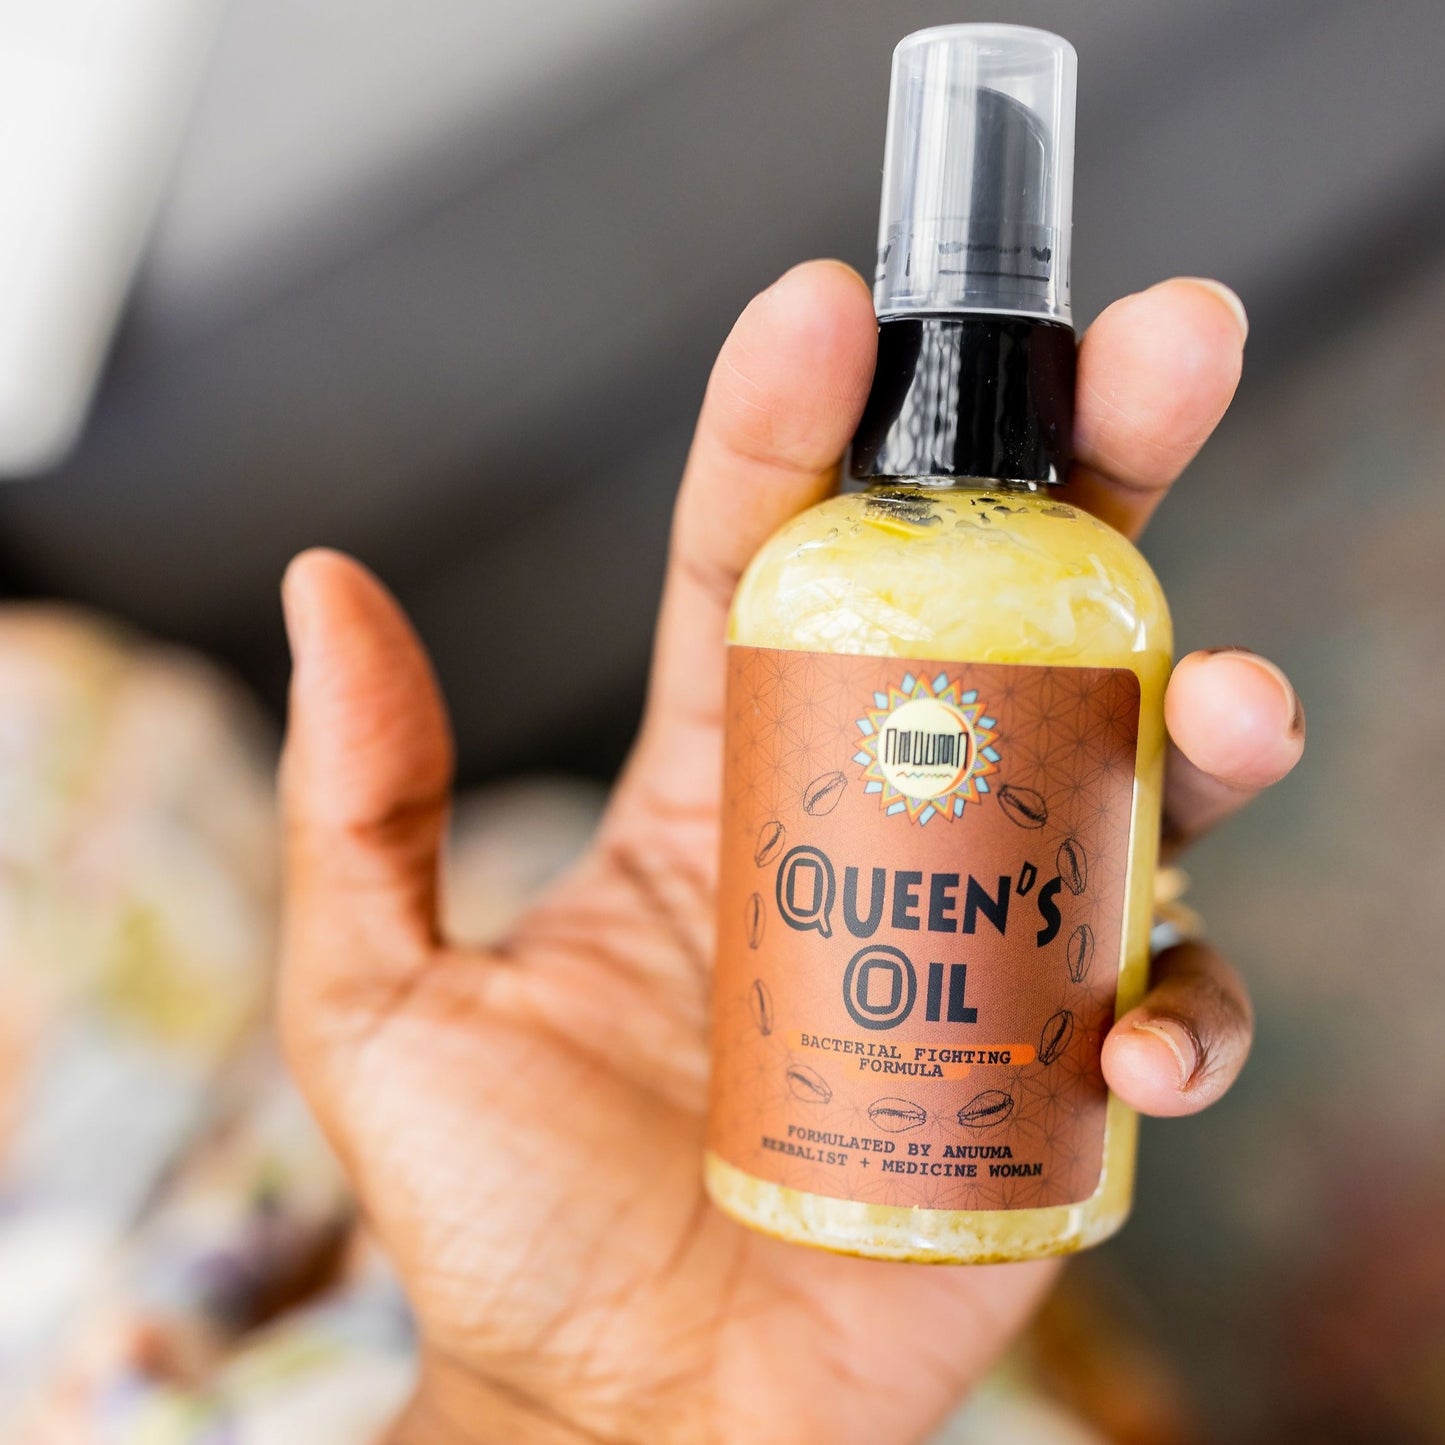 Queen's Oil - Bacterial Fighting Yoni Oil